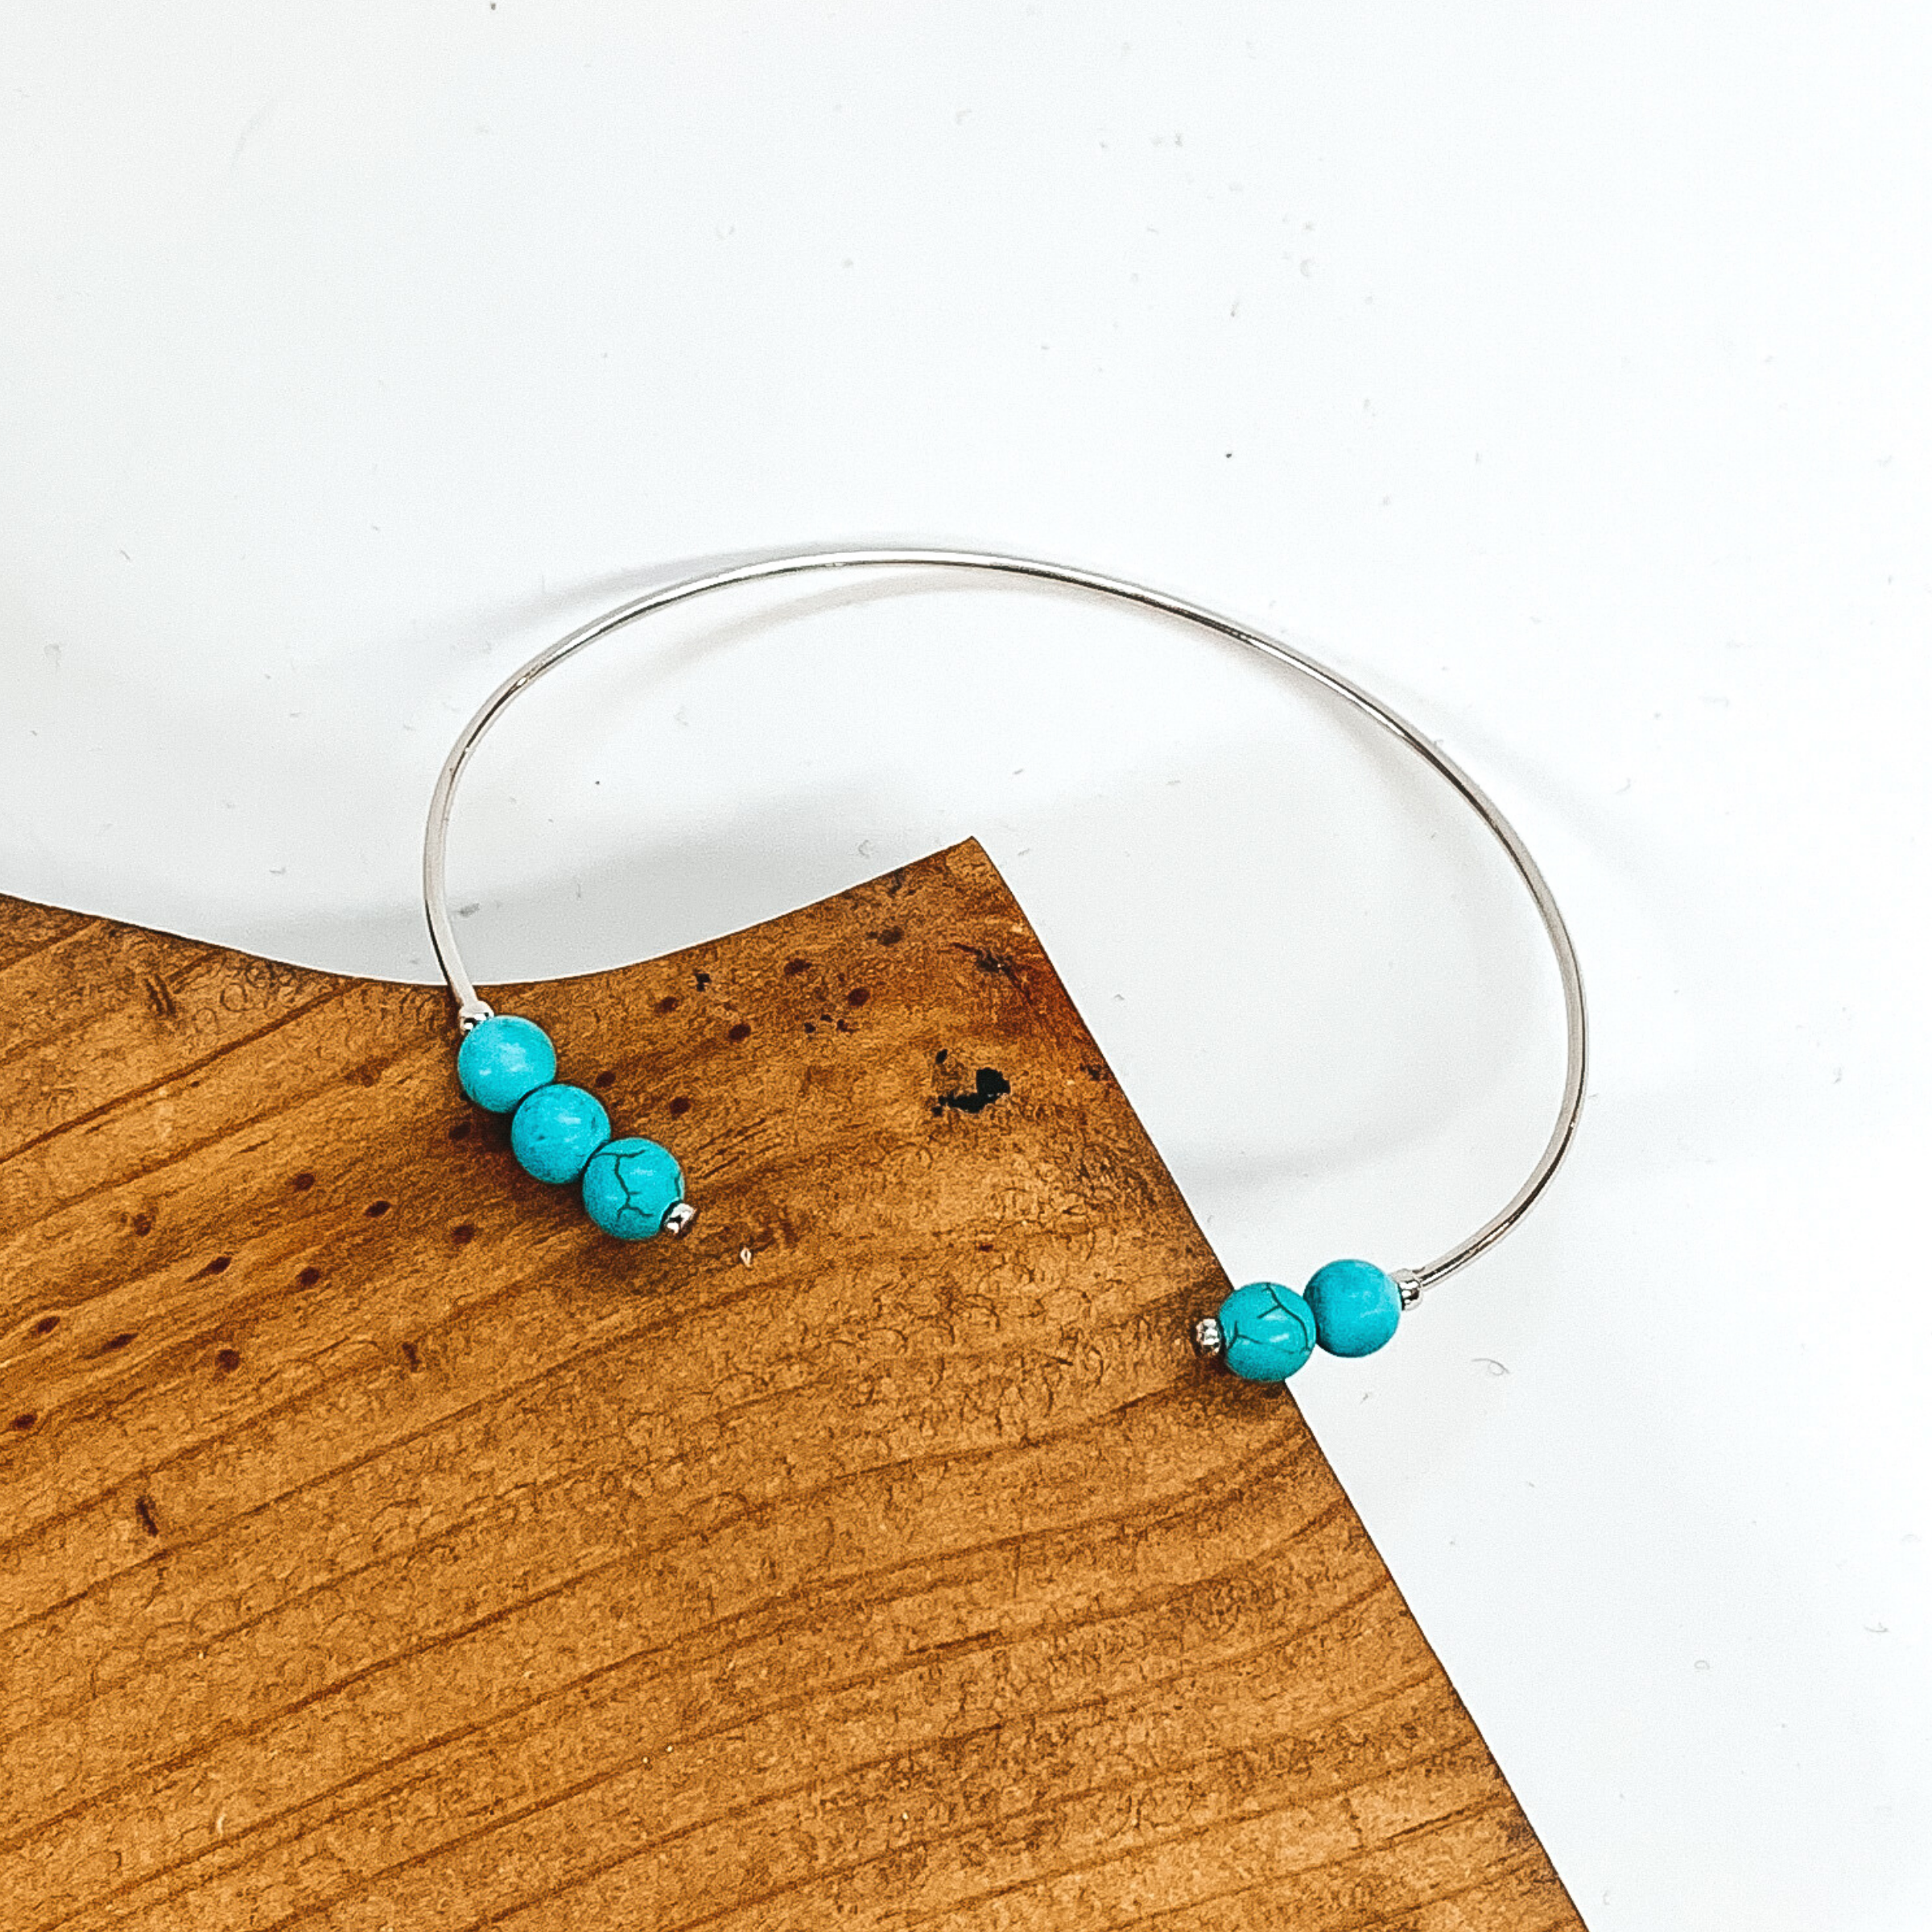 Silver, thin wire bangle bracelet with beaded turquoise ends. This bracelet is pictured laying partially on a brown block on a white background. 